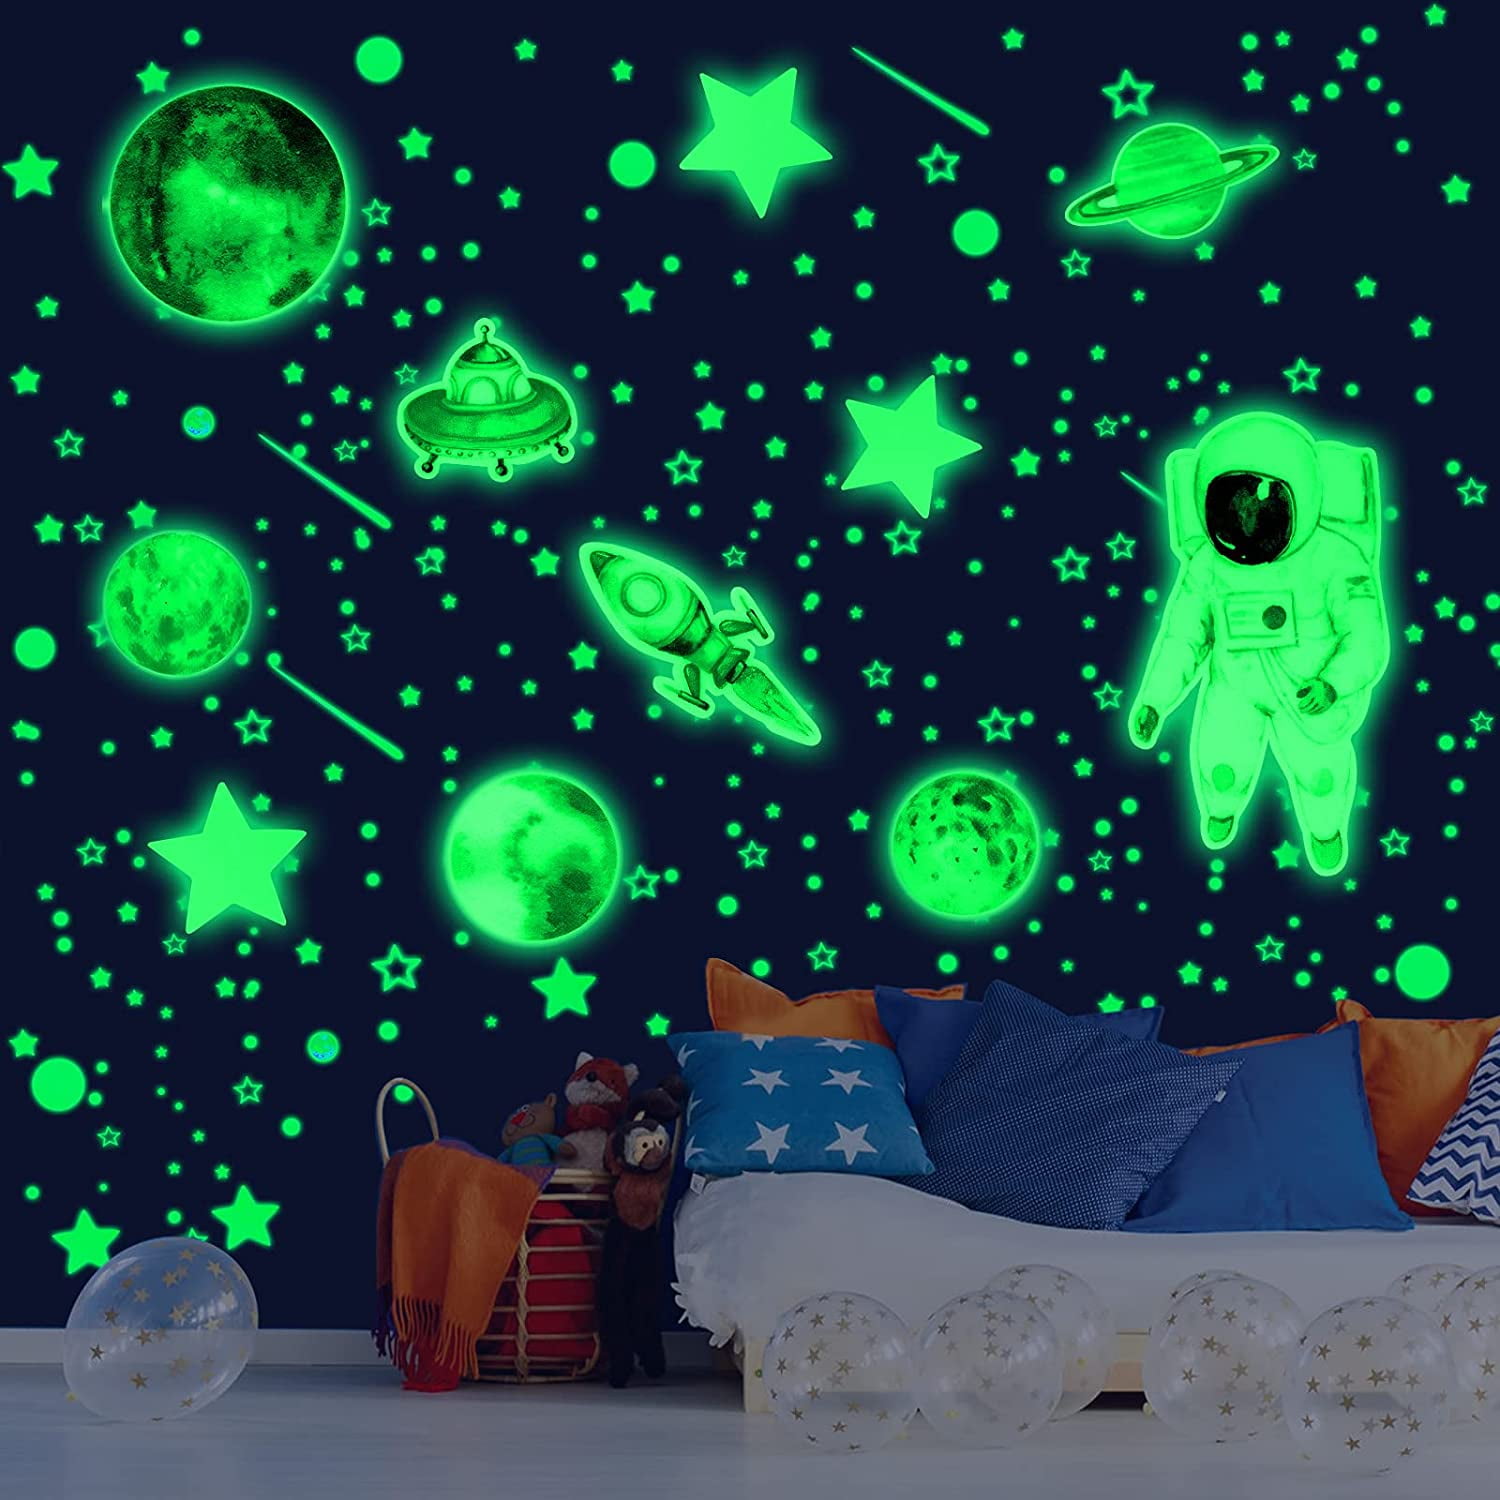 Glow in the Dark Stars Planets Moons Dinosaurs Unicorns Ceiling Wall Stickers 